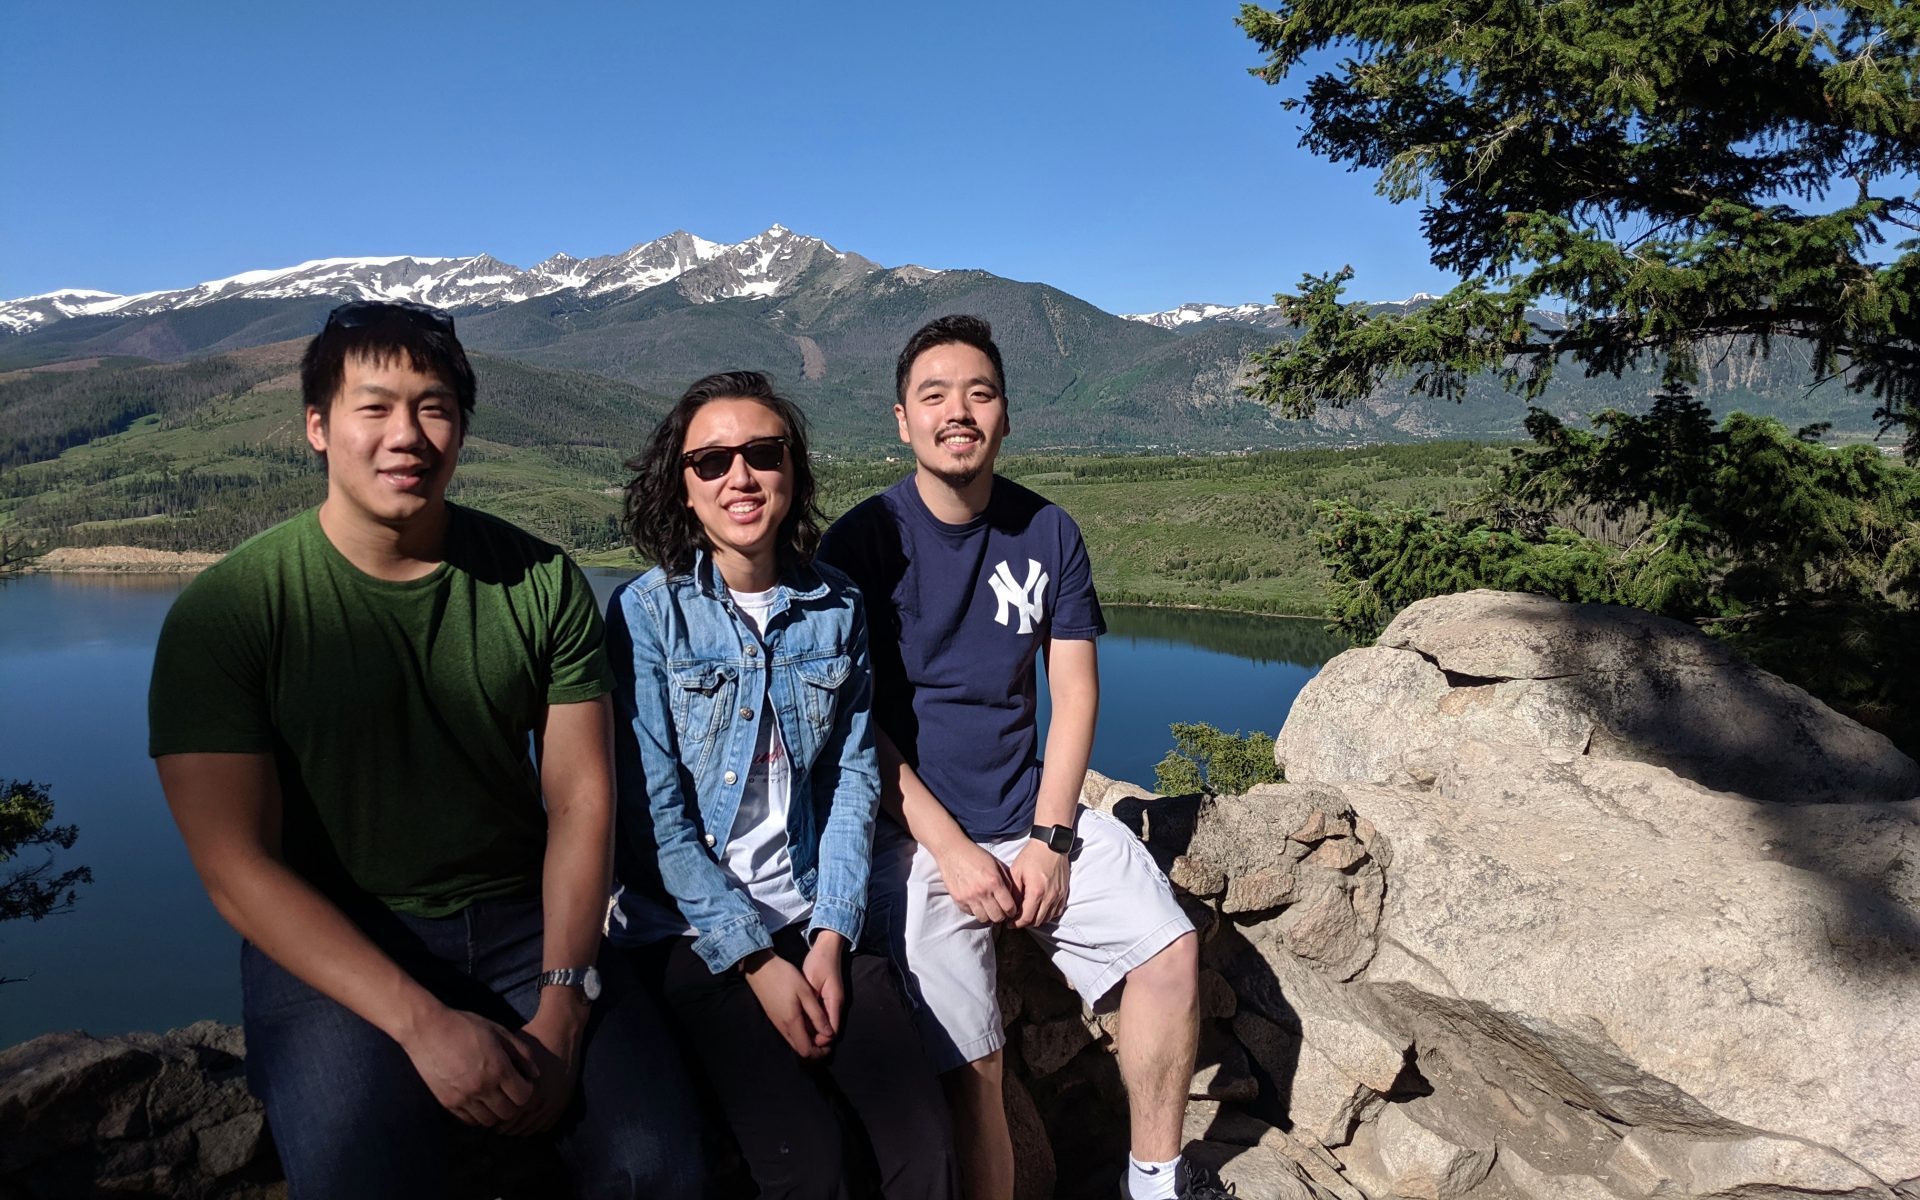 MD/PhD Students enjoying the CO outdoors